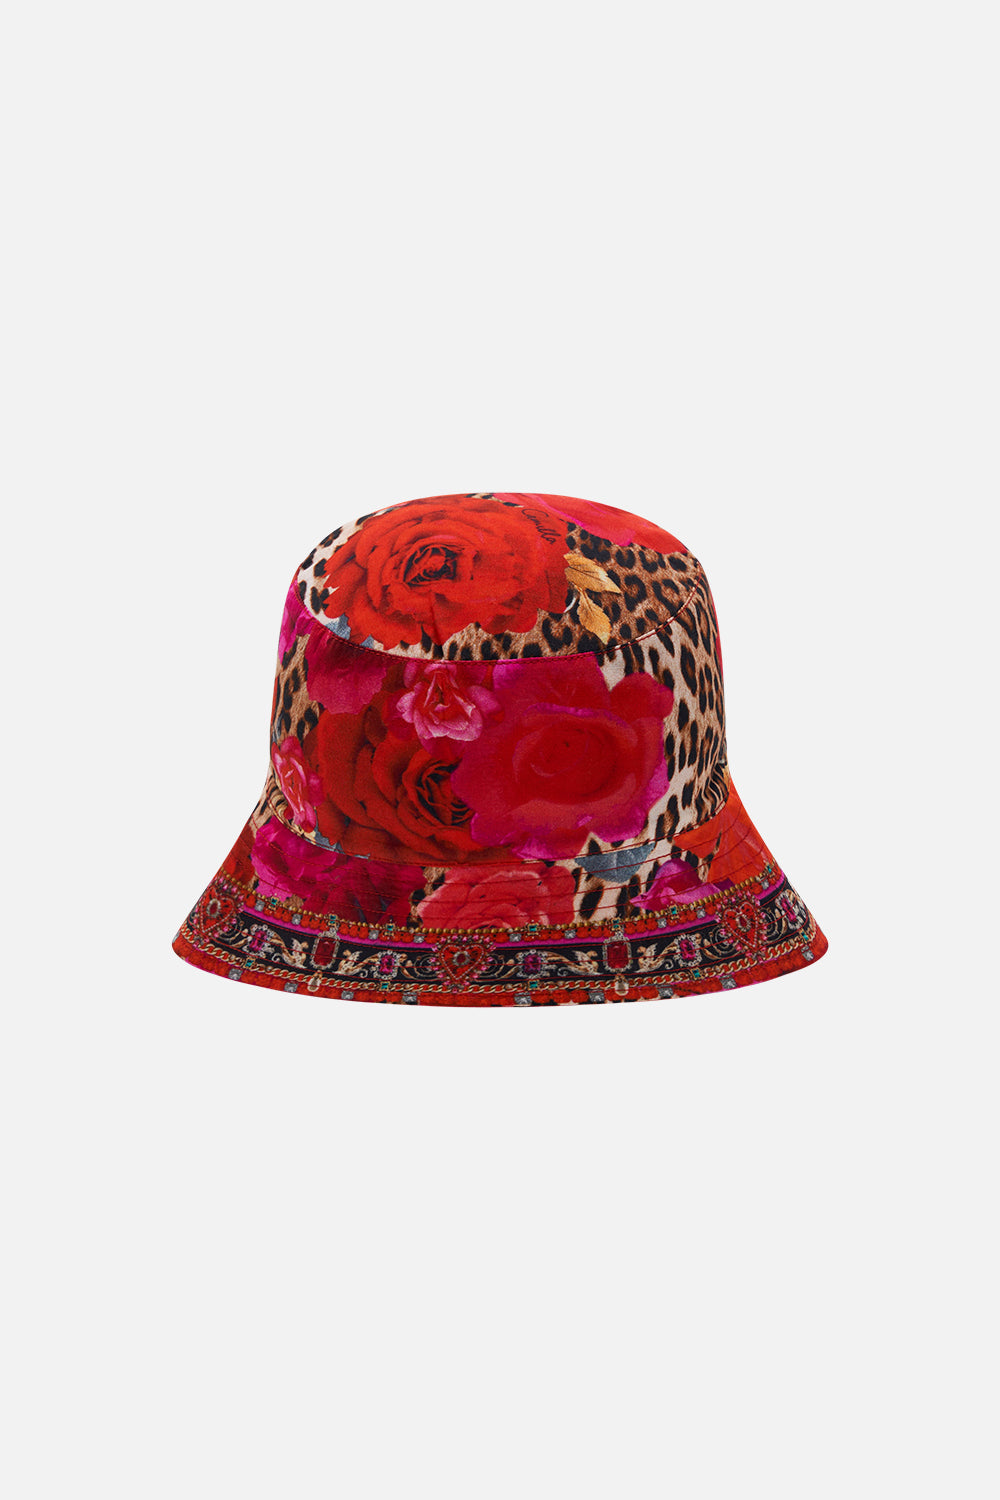 Product view is Milla By CAMILLA kids reversible bucket in An Italian Rosa print 